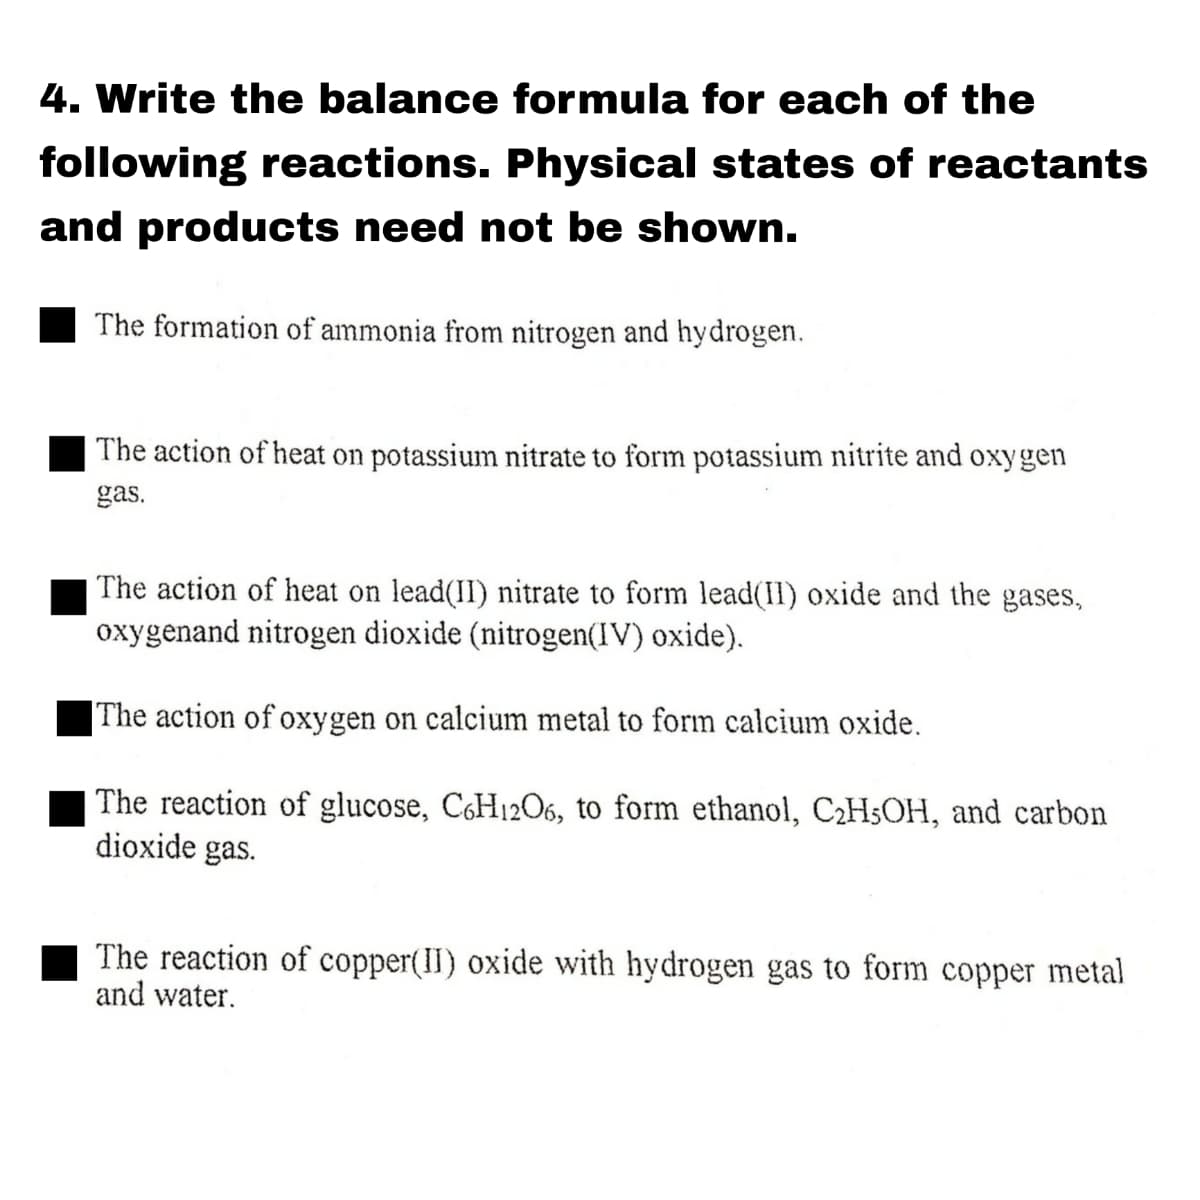 4. Write the balance formula for each of the
following reactions. Physical states of reactants
and products need not be shown.
The formation of ammonia from nitrogen and hydrogen.
The action of heat on potassium nitrate to form potassium nitrite and oxygen
gas.
The action of heat on lead(II) nitrate to form lead(II) oxide and the gases,
oxygenand nitrogen dioxide (nitrogen(IV) oxide).
|The action of oxygen on calcium metal to form calcium oxide.
The reaction of glucose, C6H1206, to form ethanol, C2H5OH, and carbon
dioxide gas.
The reaction of copper(II) oxide with hydrogen gas to form copper metal
and water.
